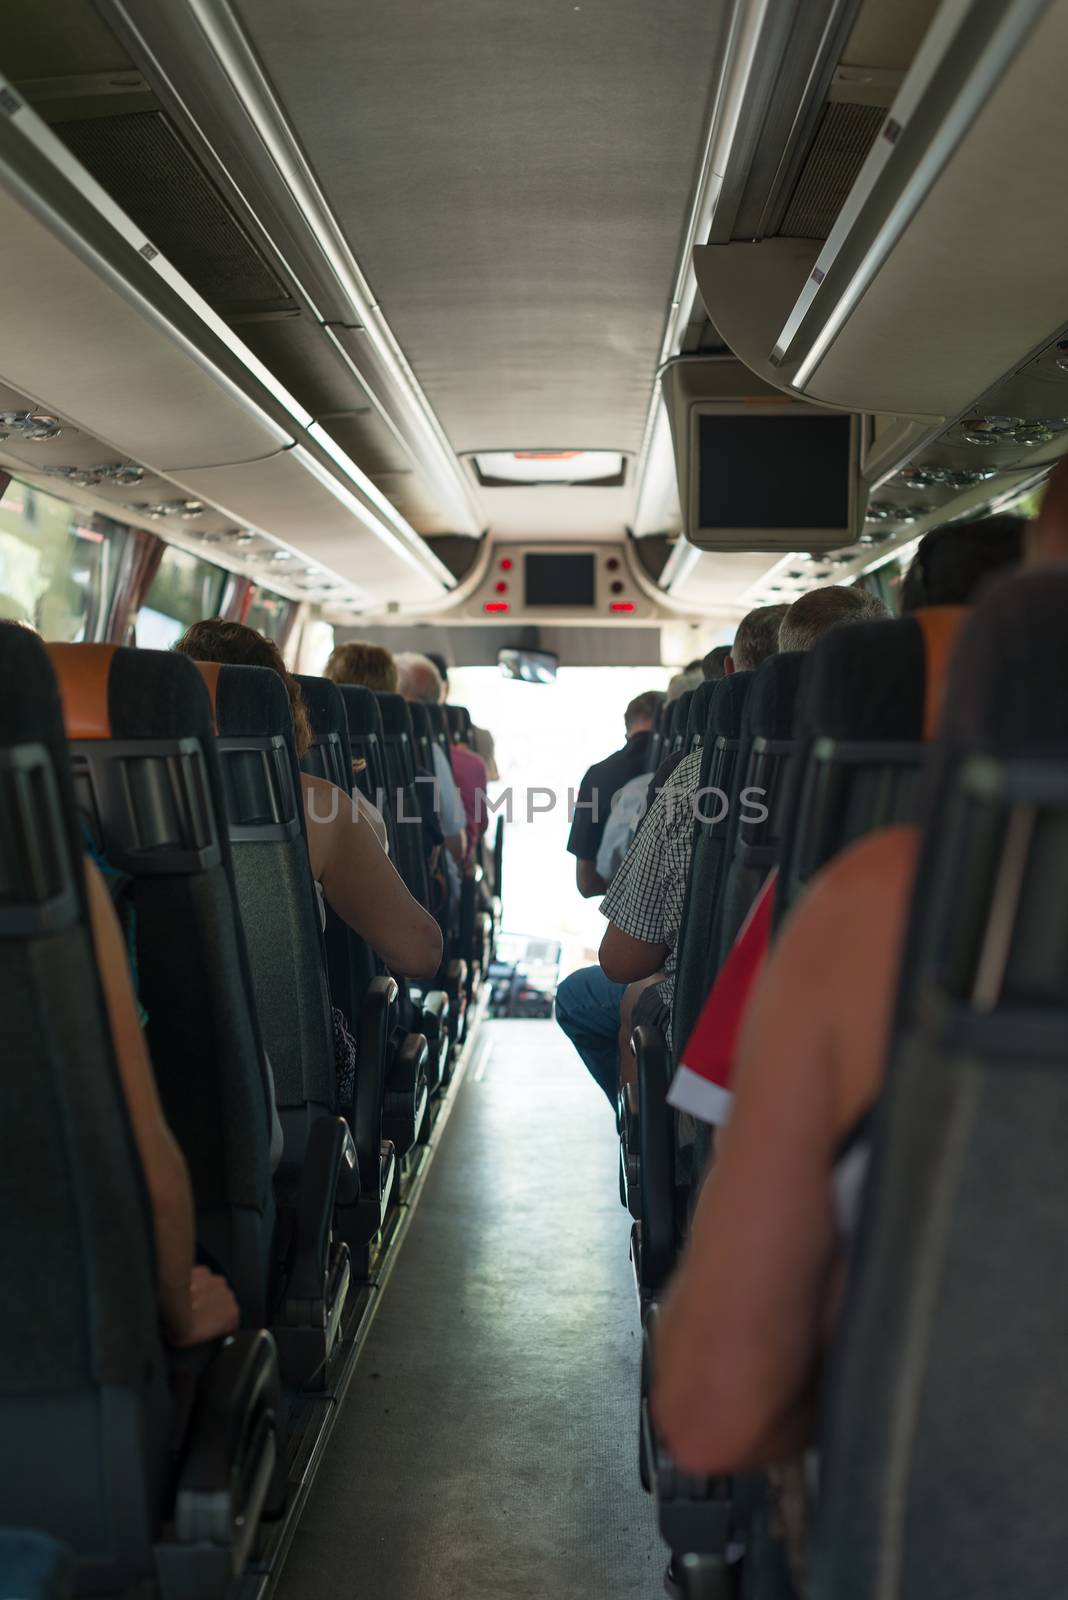 View from inside the bus with passengers. by dmitrimaruta